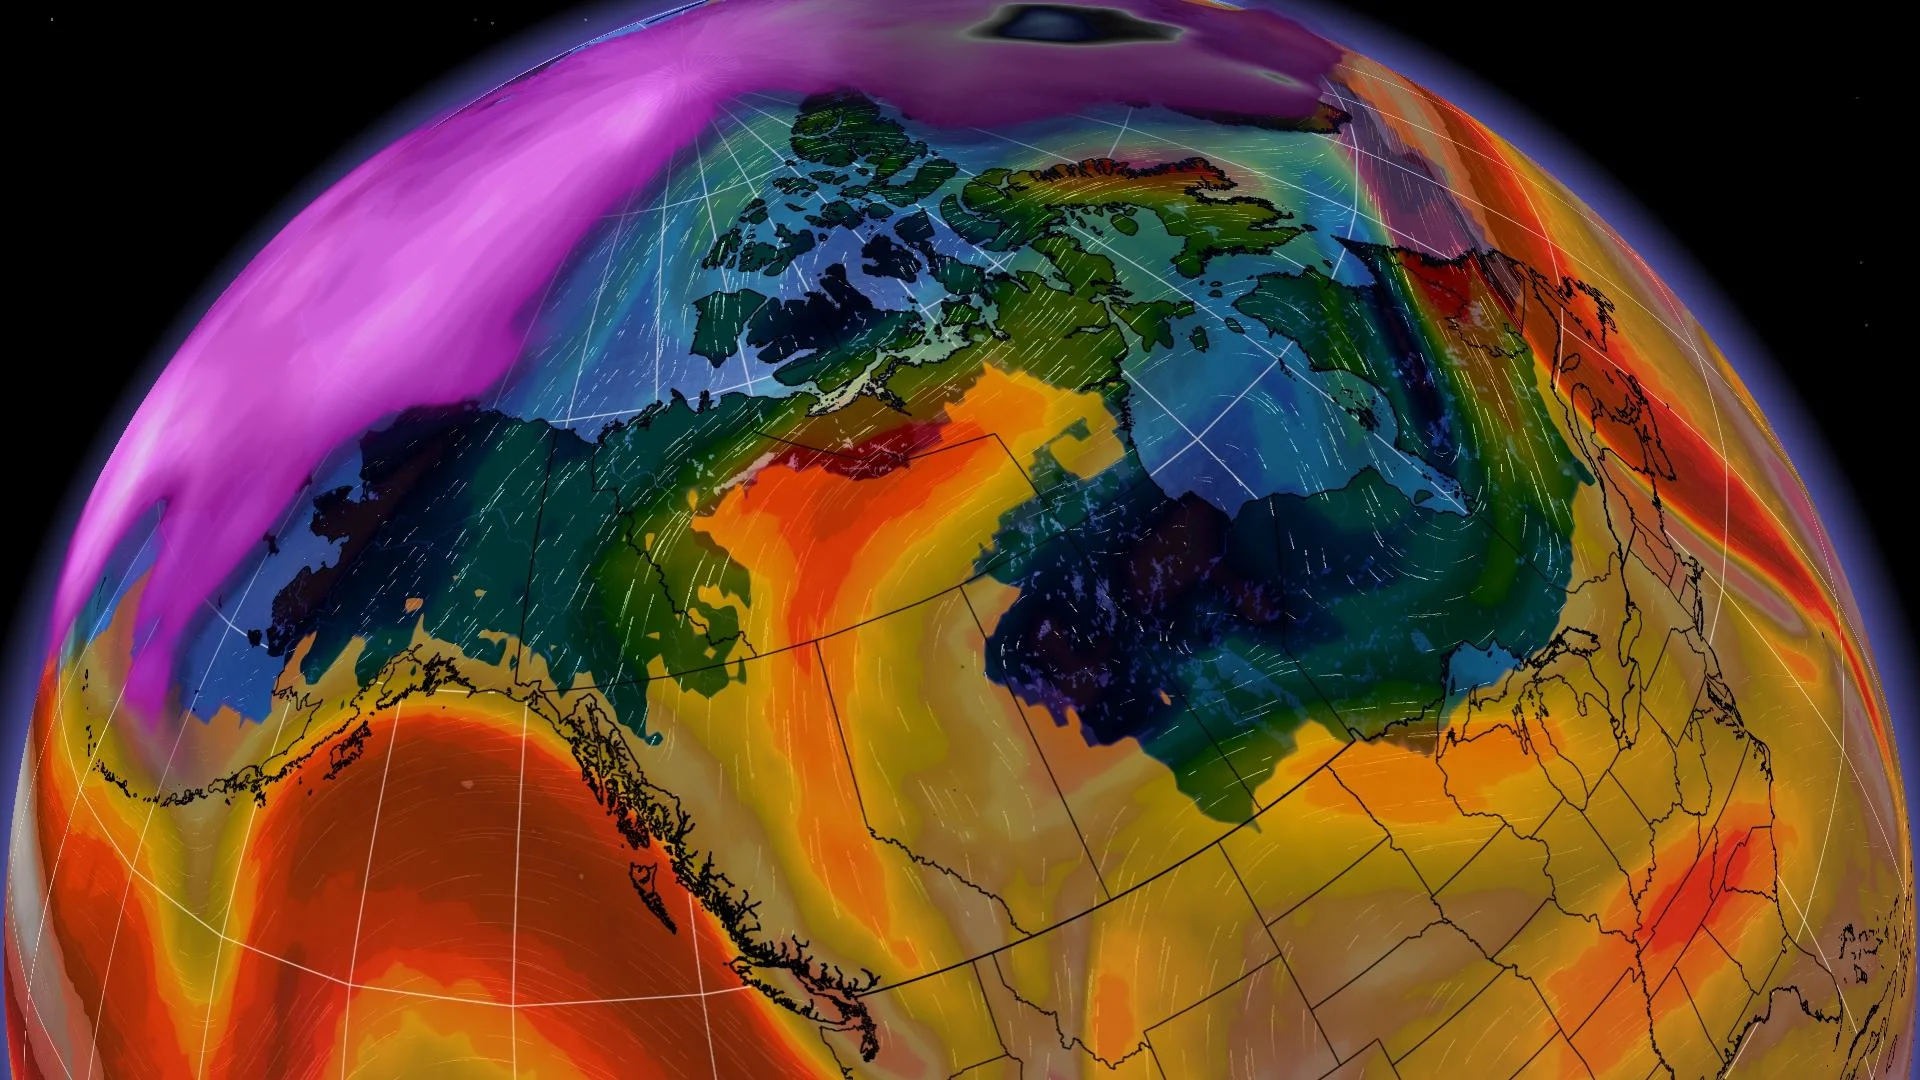 While winter is near, Canada's weather is telling a different story